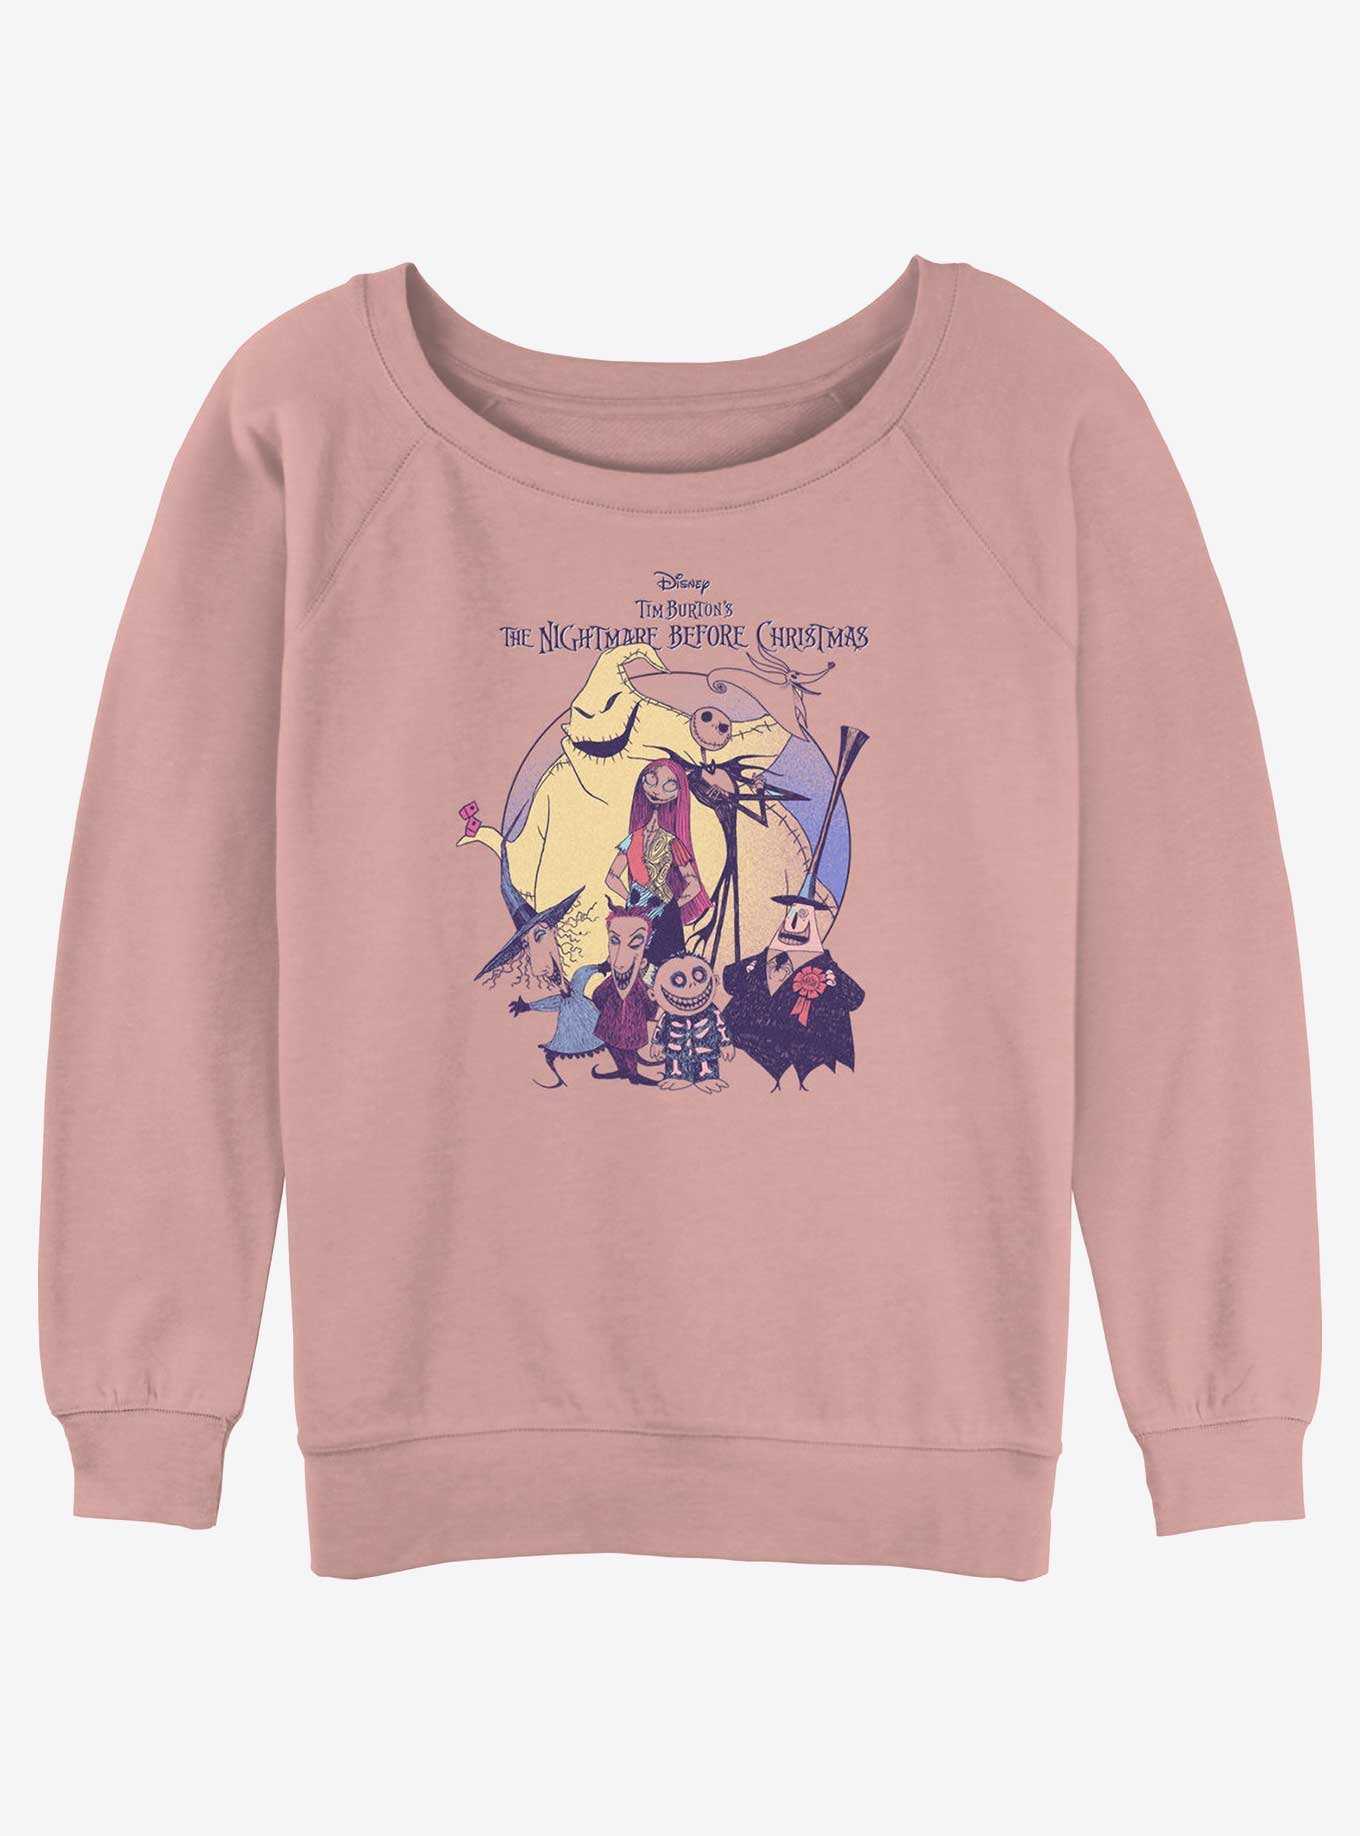 Disney The Nightmare Before Christmas Scary Squad Girls Slouchy Sweatshirt, , hi-res